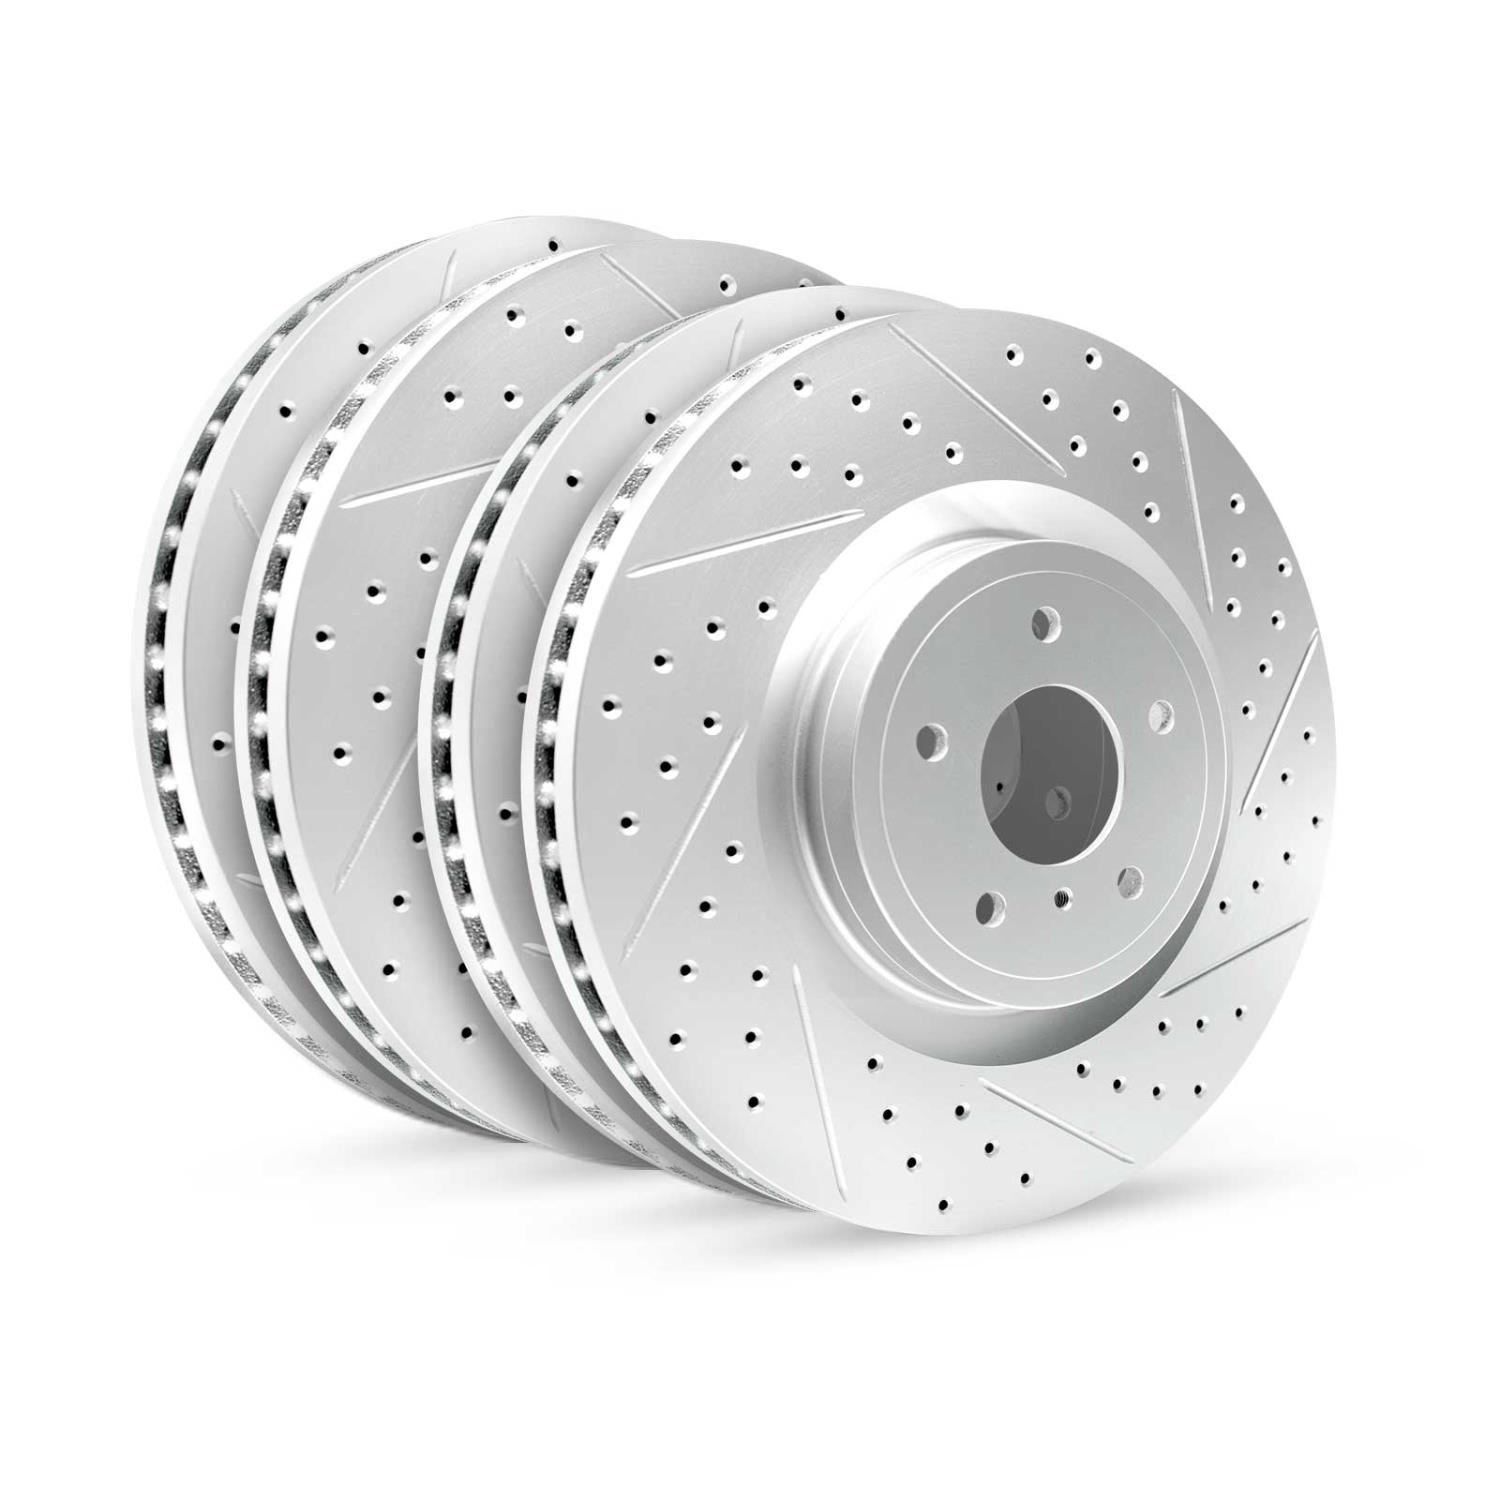 GEO-Carbon Drilled/Slotted Rotors, 1999-2001 Infiniti/Nissan, Position: Front/Rear